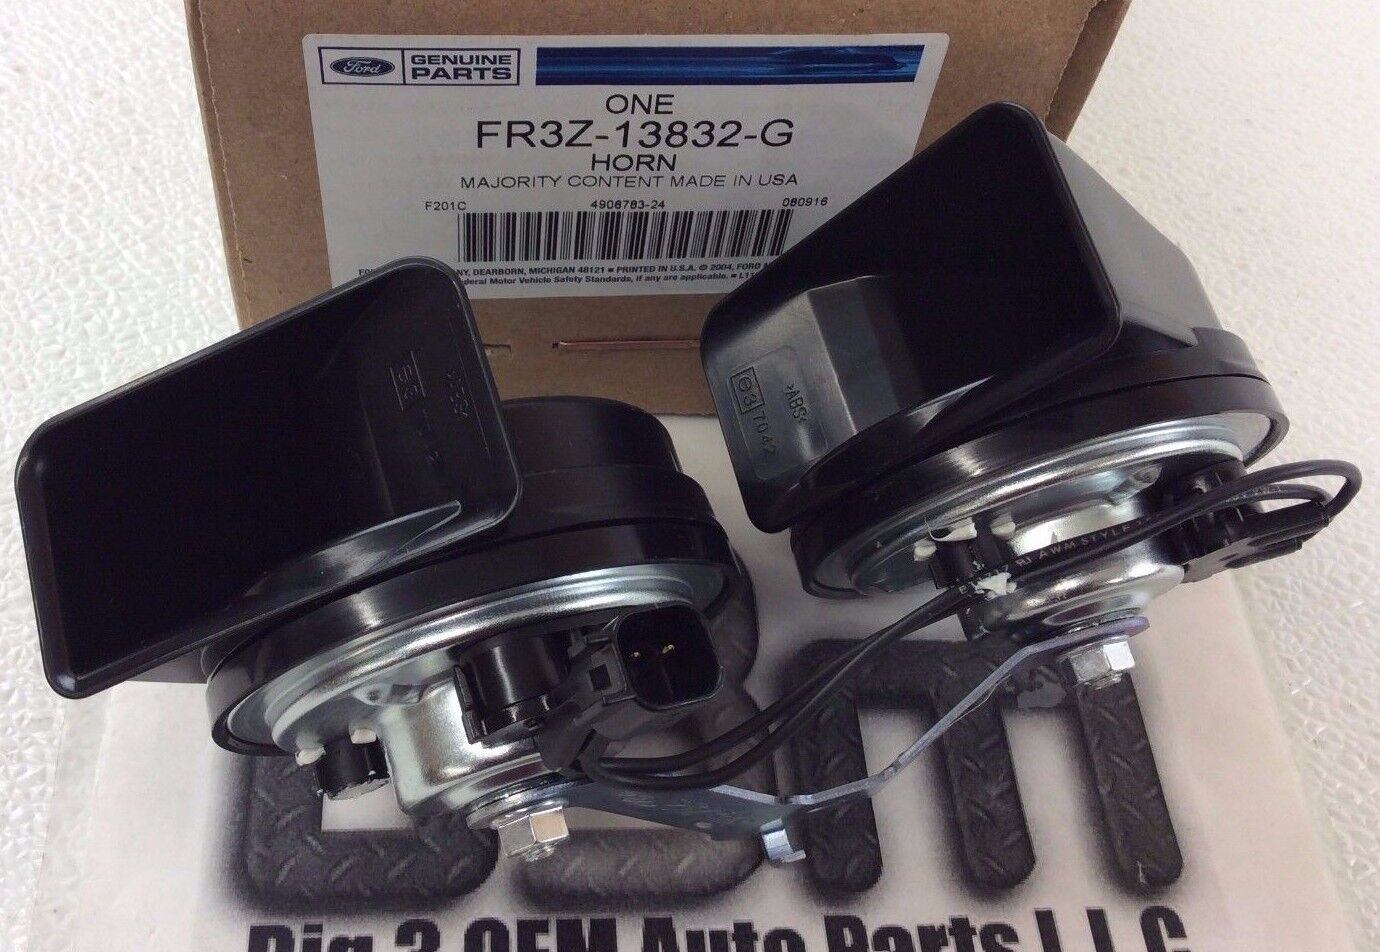 2015 2016 2017 Ford Mustang Dual Note Electric Horn Level 2 new OEM FR3Z-13832-G